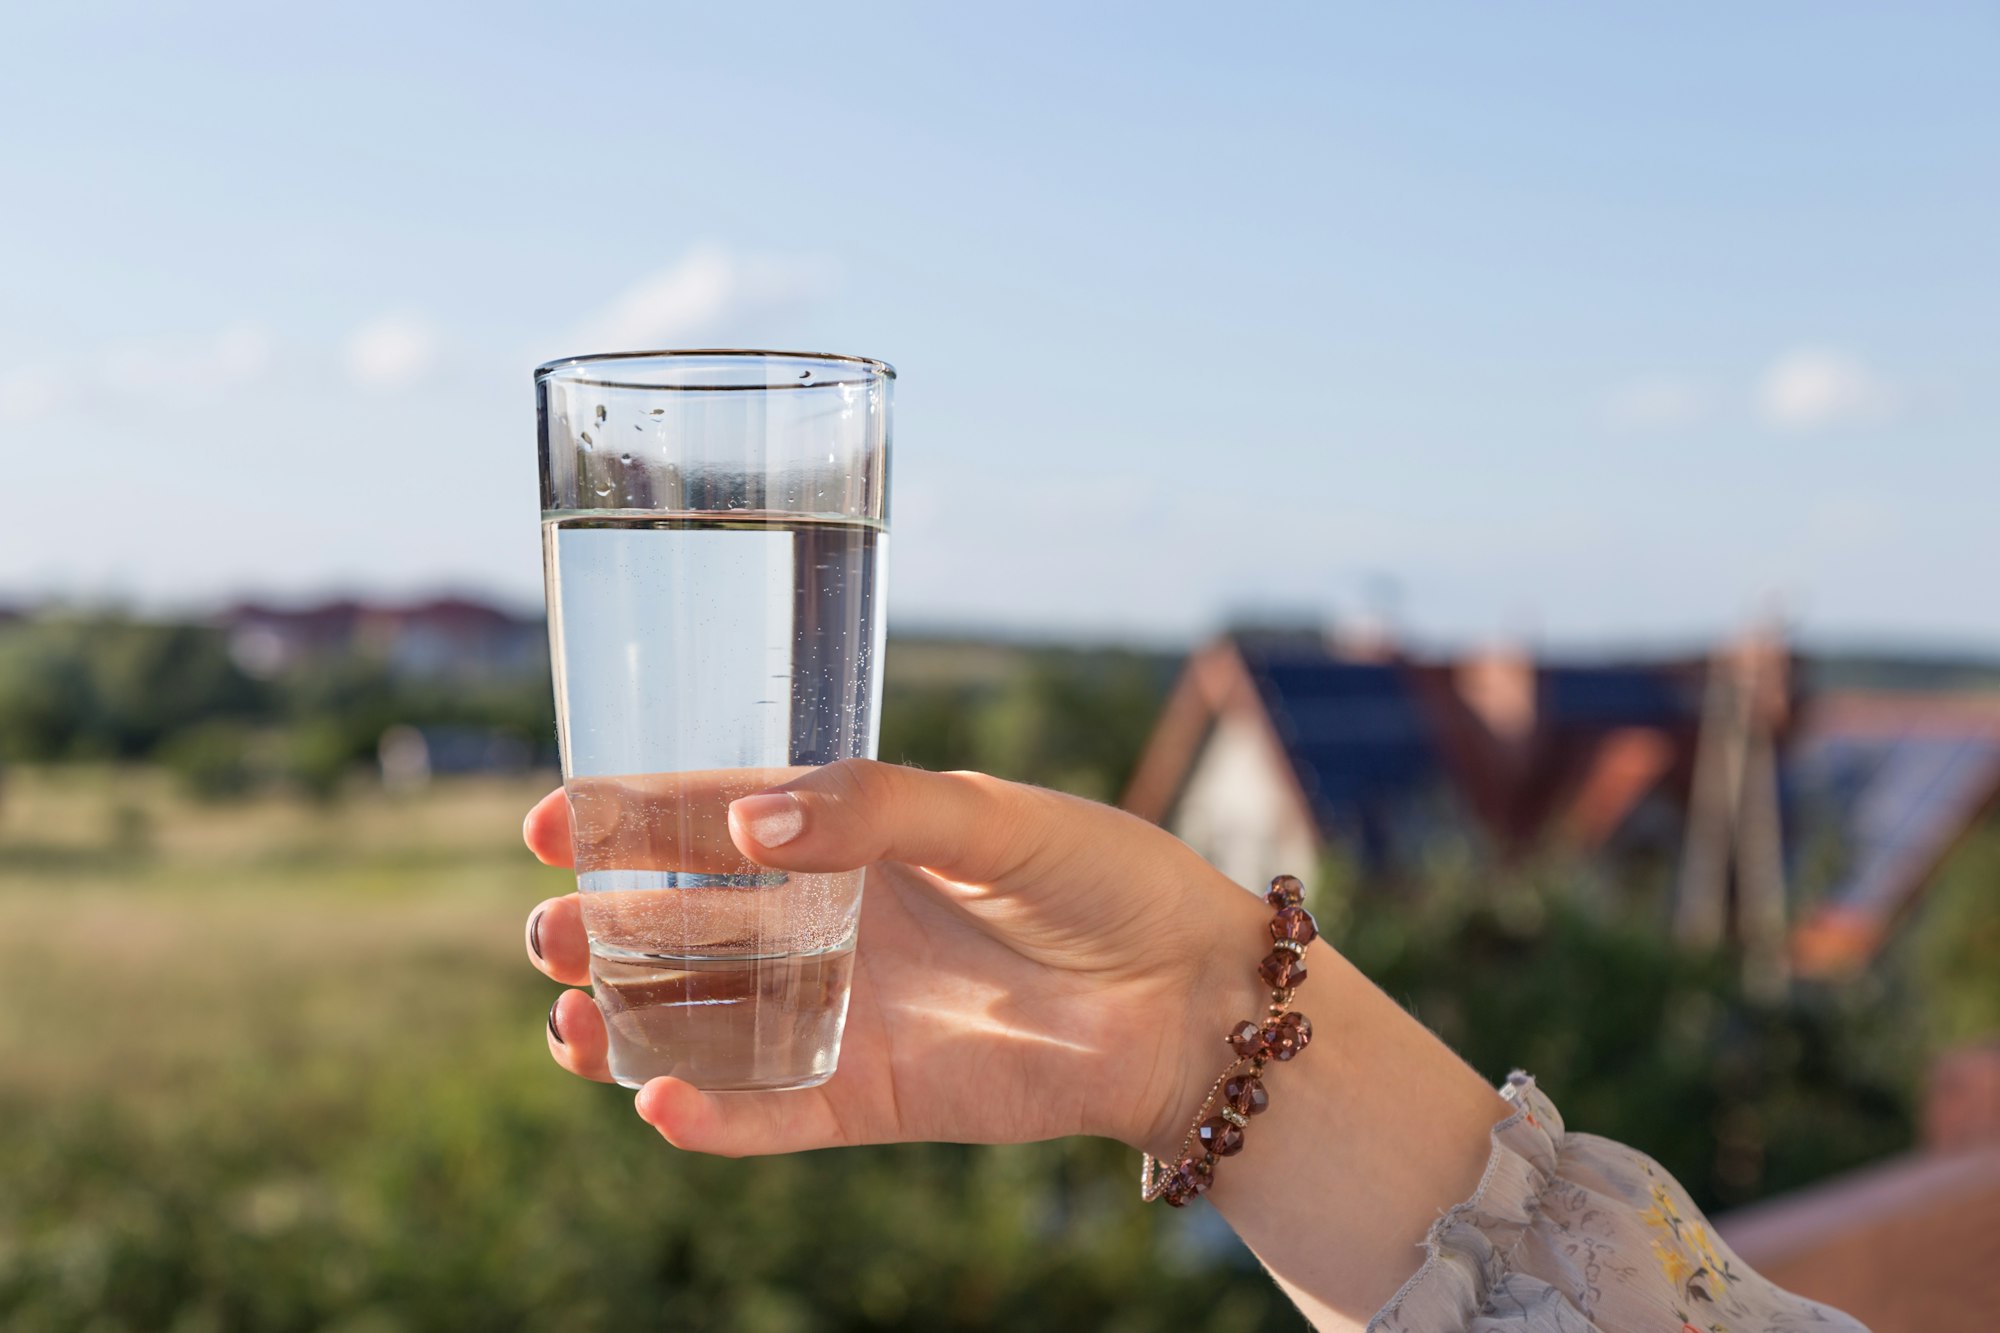 A woman's hand holds a glass of drinking water against a natural background